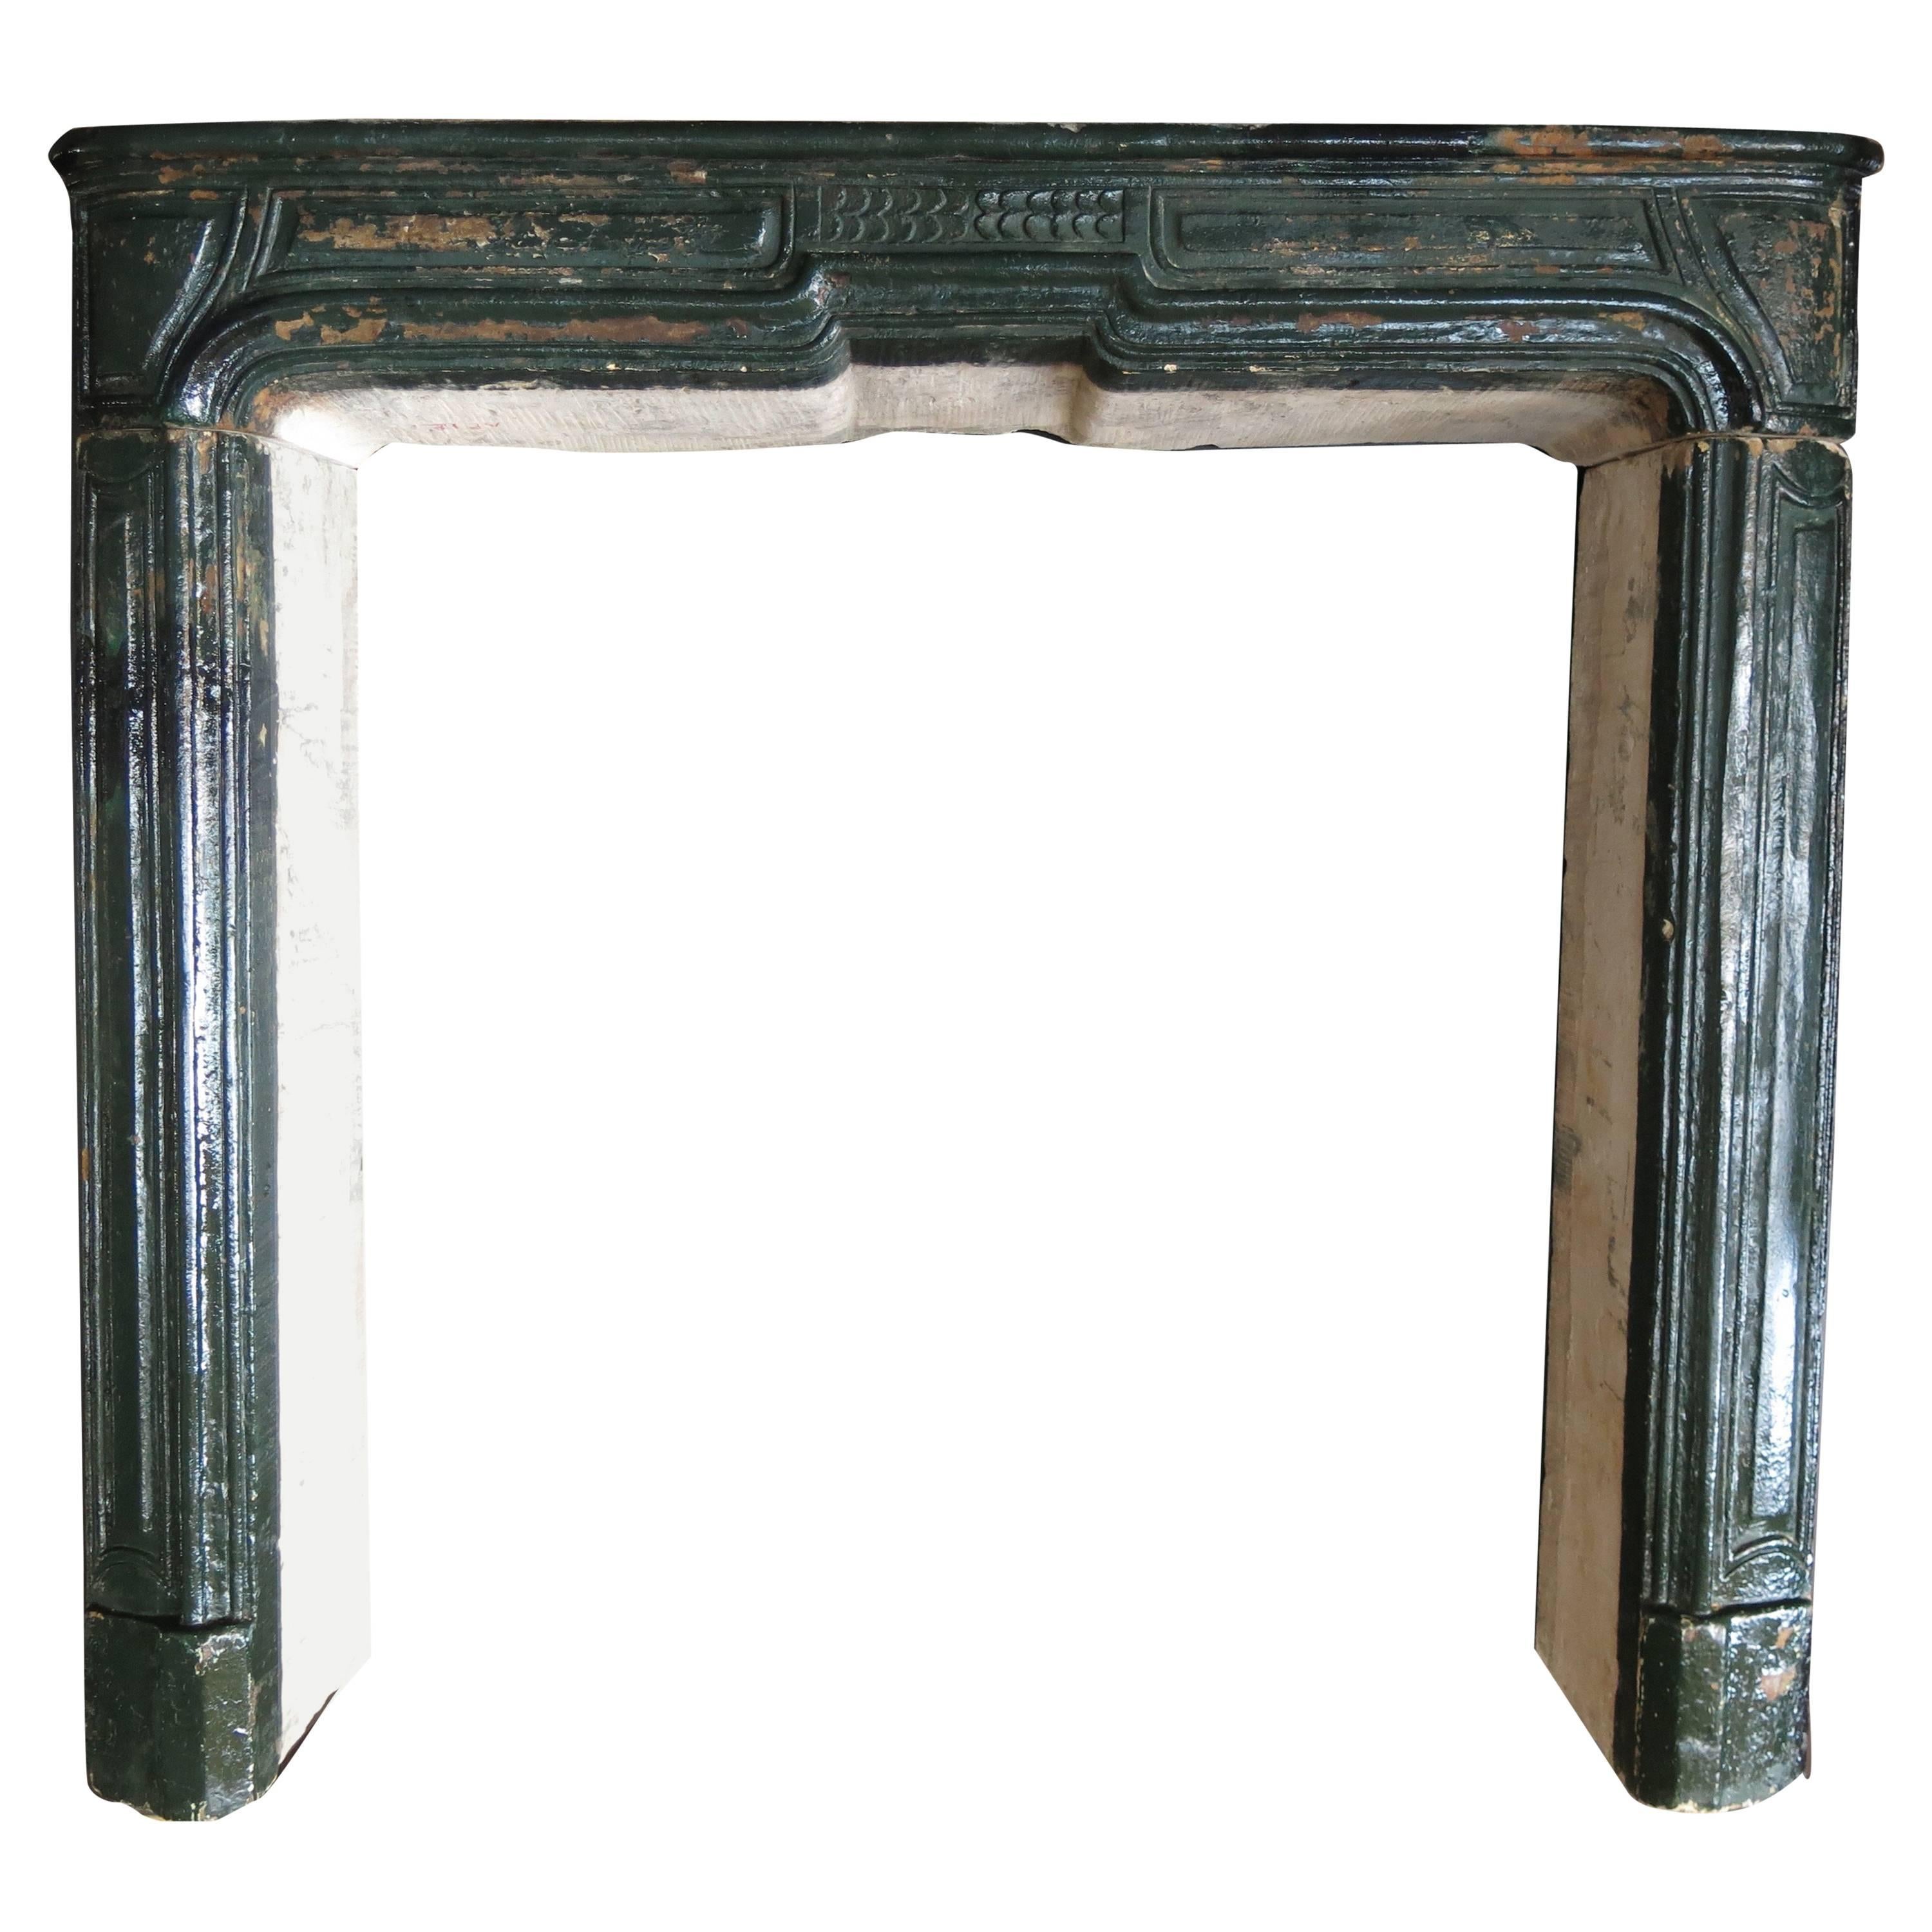 Original Louis XIV Period Fireplace, Hand-Carved in France, 17th Century For Sale